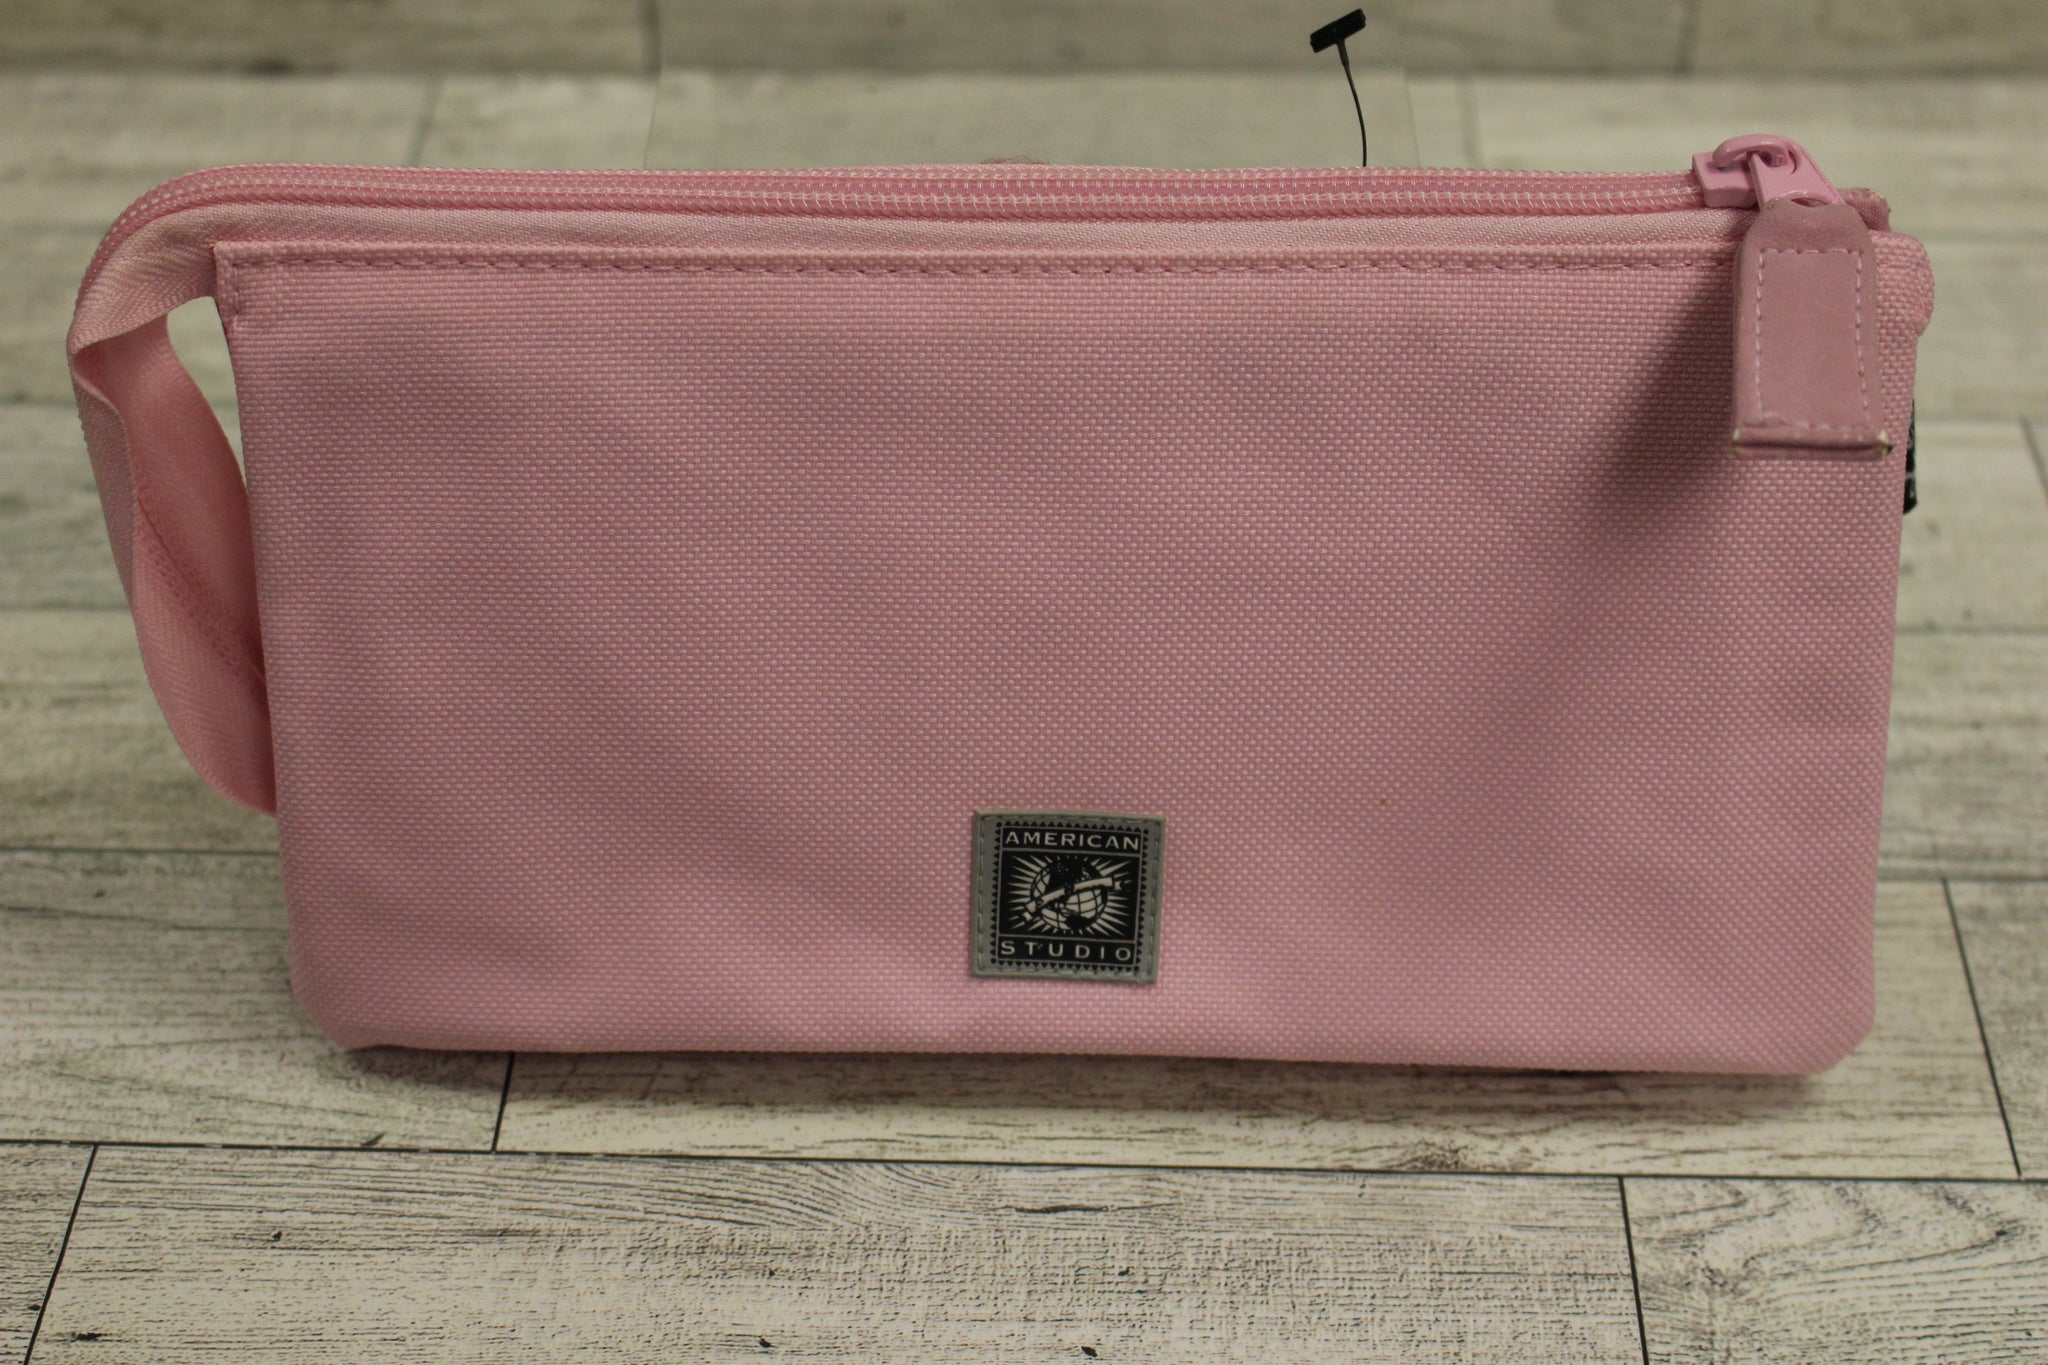 Leenie Triple Pouch Pencil Pouch -Pink -New – Military Steals and